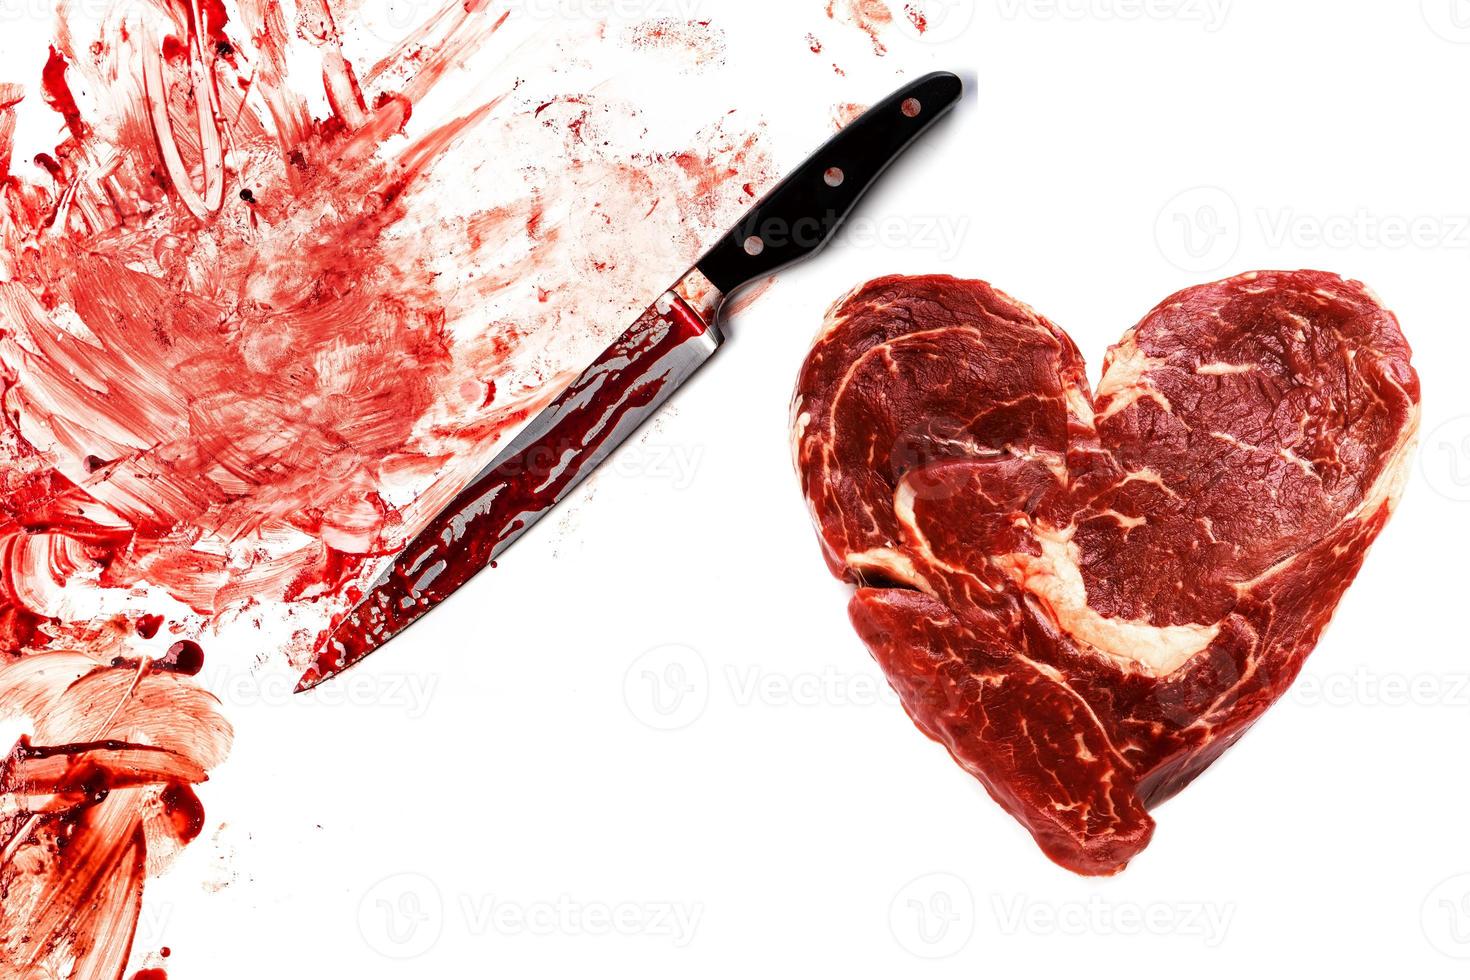 Fresh raw meat in shape of heart, knife and blood splatters photo